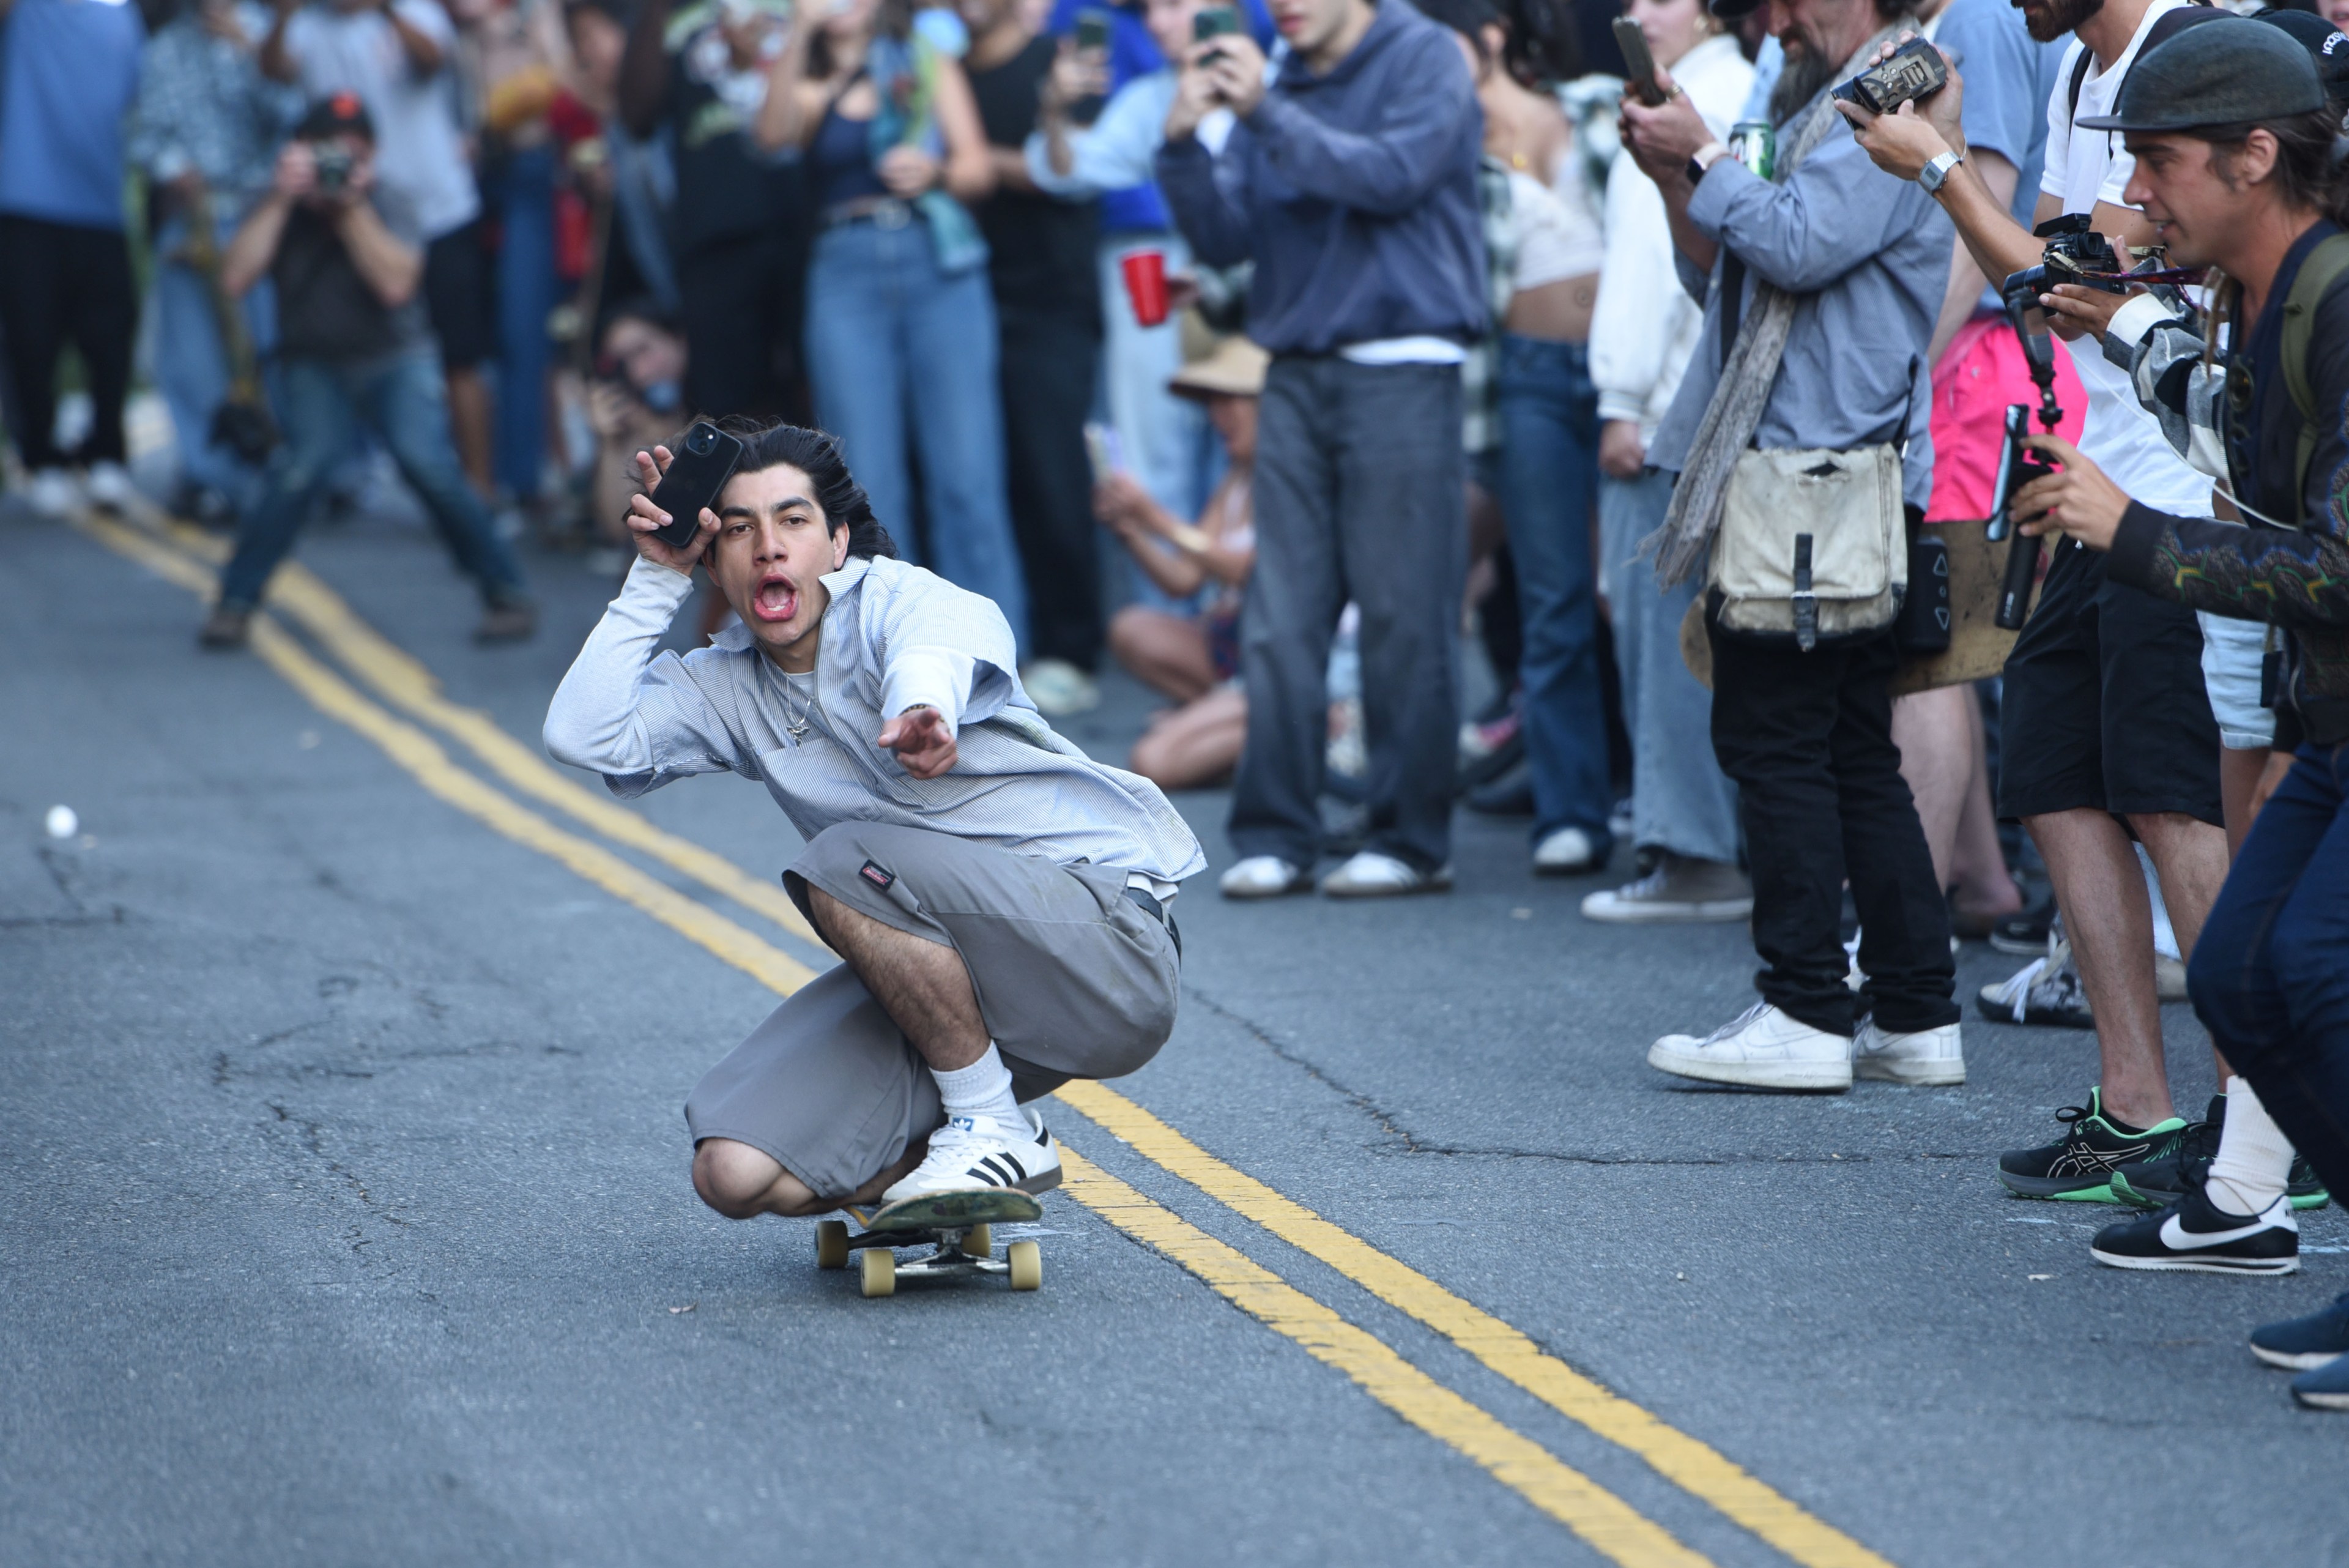 A man skateboards down a street, crouching low with a playful expression, while holding a phone up. A crowd of onlookers, many taking photos, lines both sides of the street.